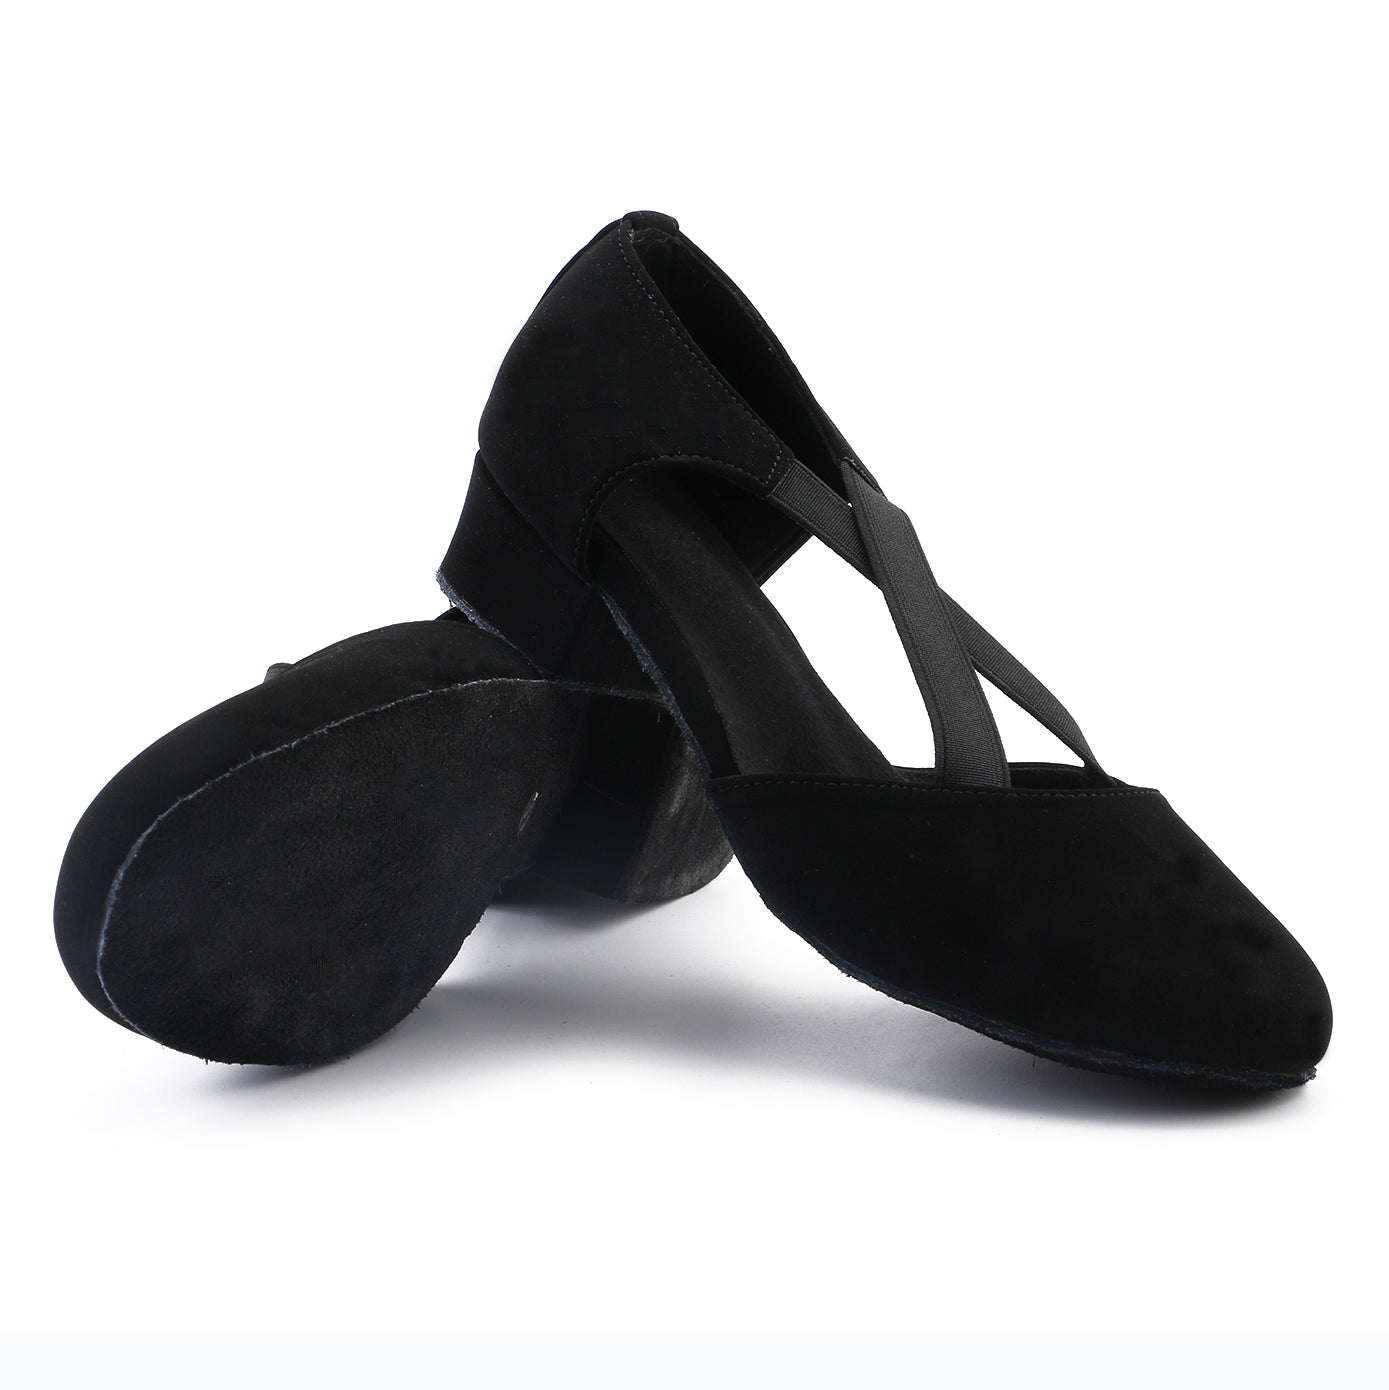 Ladies black low heel ballroom dancing shoes with suede sole for tango latin practice, closed-toe design (PD7307B)2